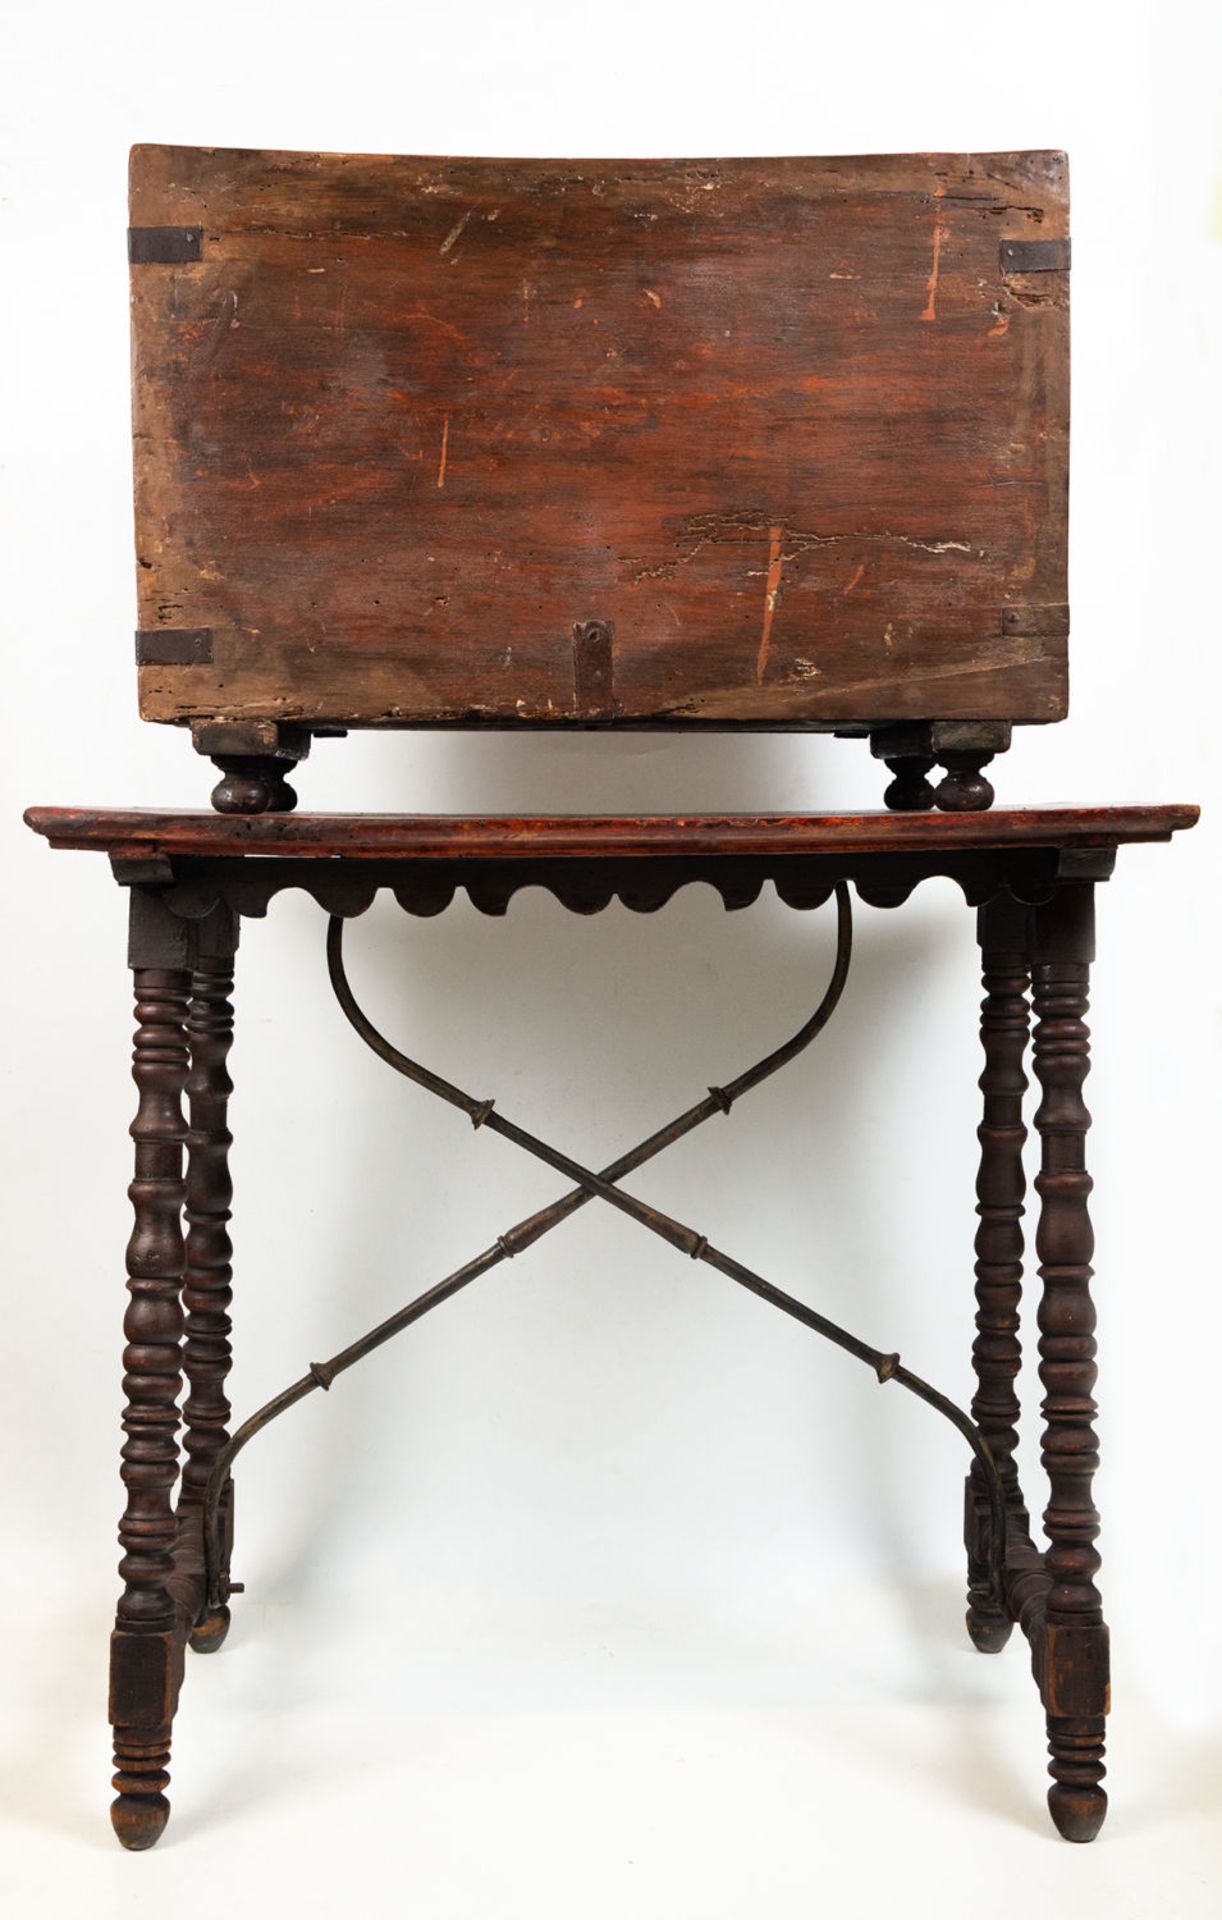 Mexican colonial style chest, 19th century - Image 7 of 8